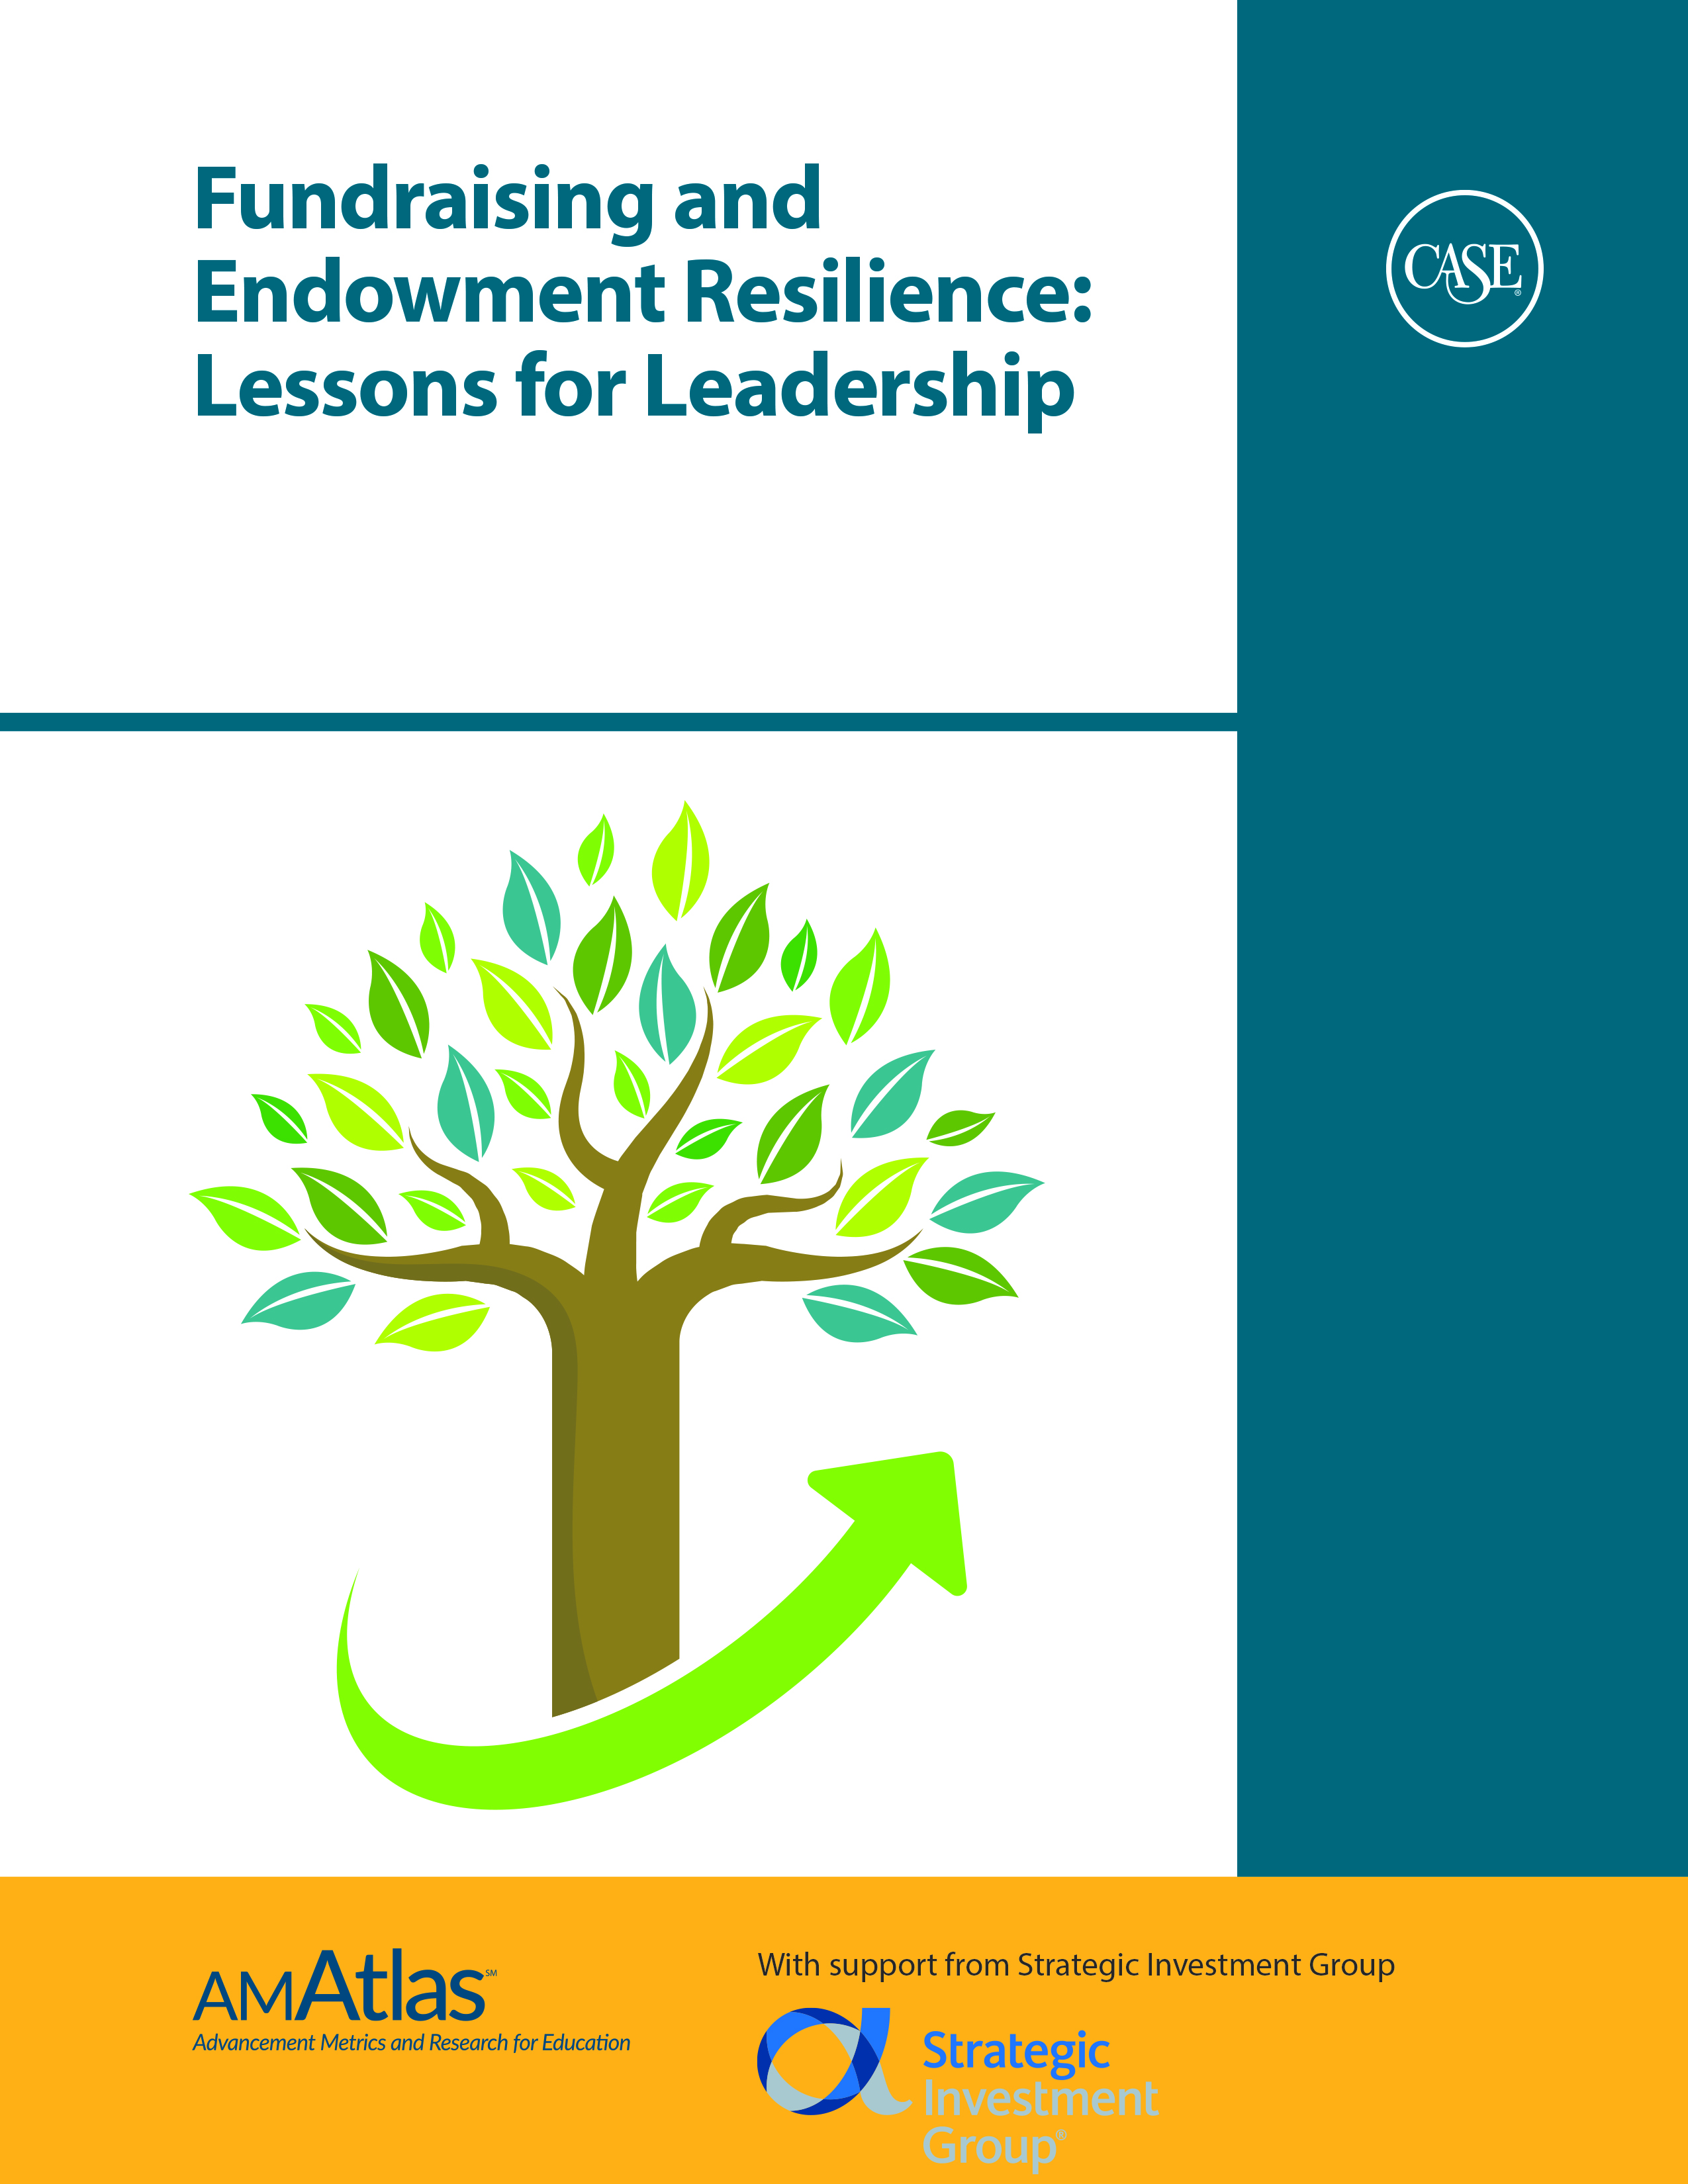 Fundraising and Endowment Resilience